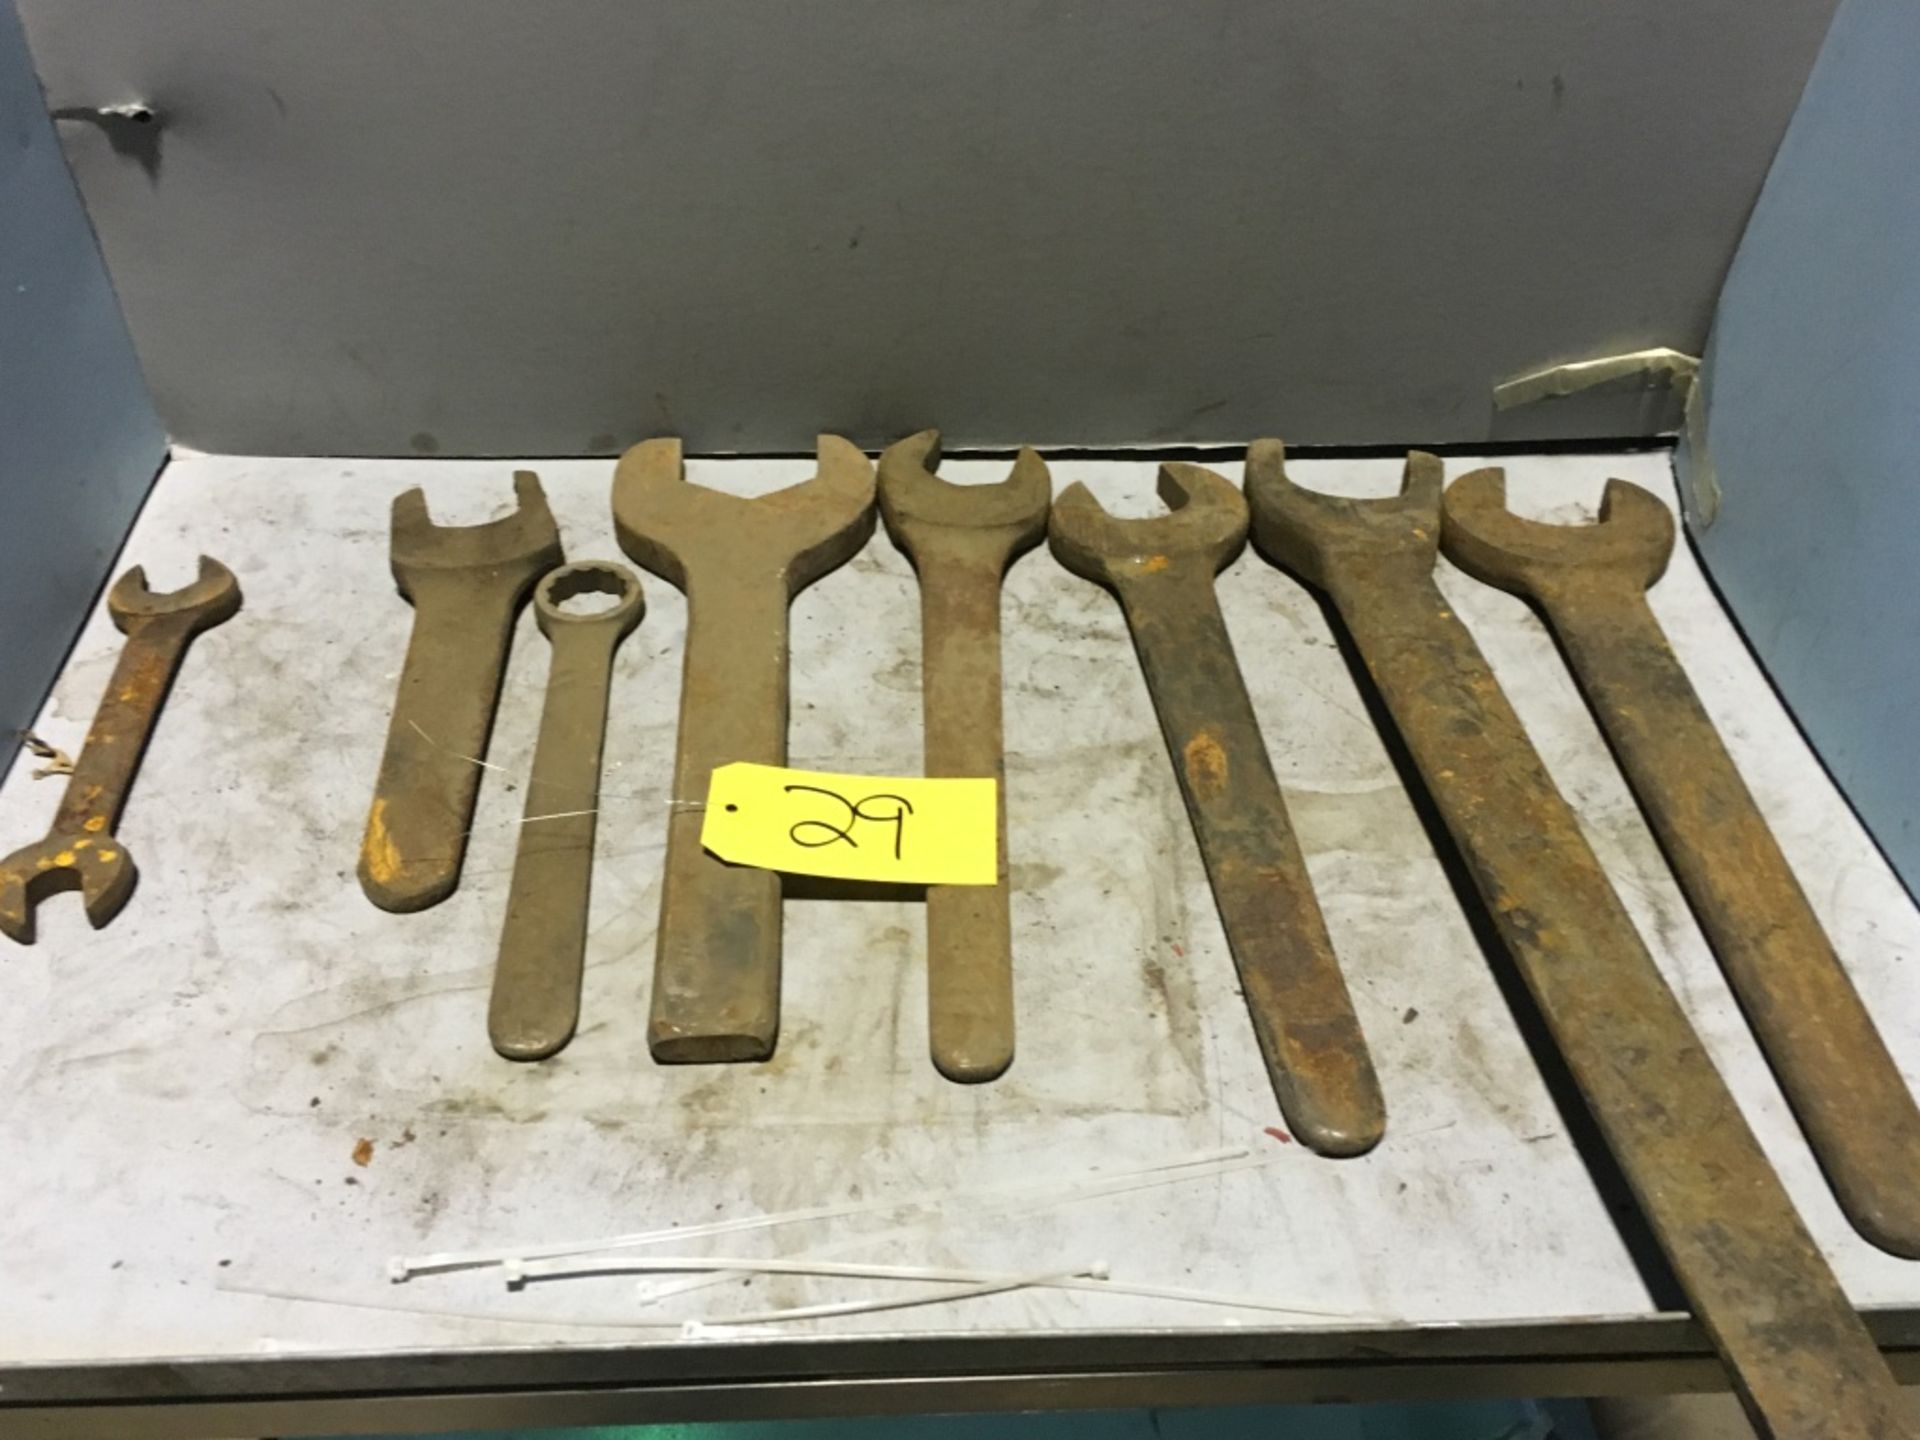 Approximately (12) heavy duty open end wrenches.